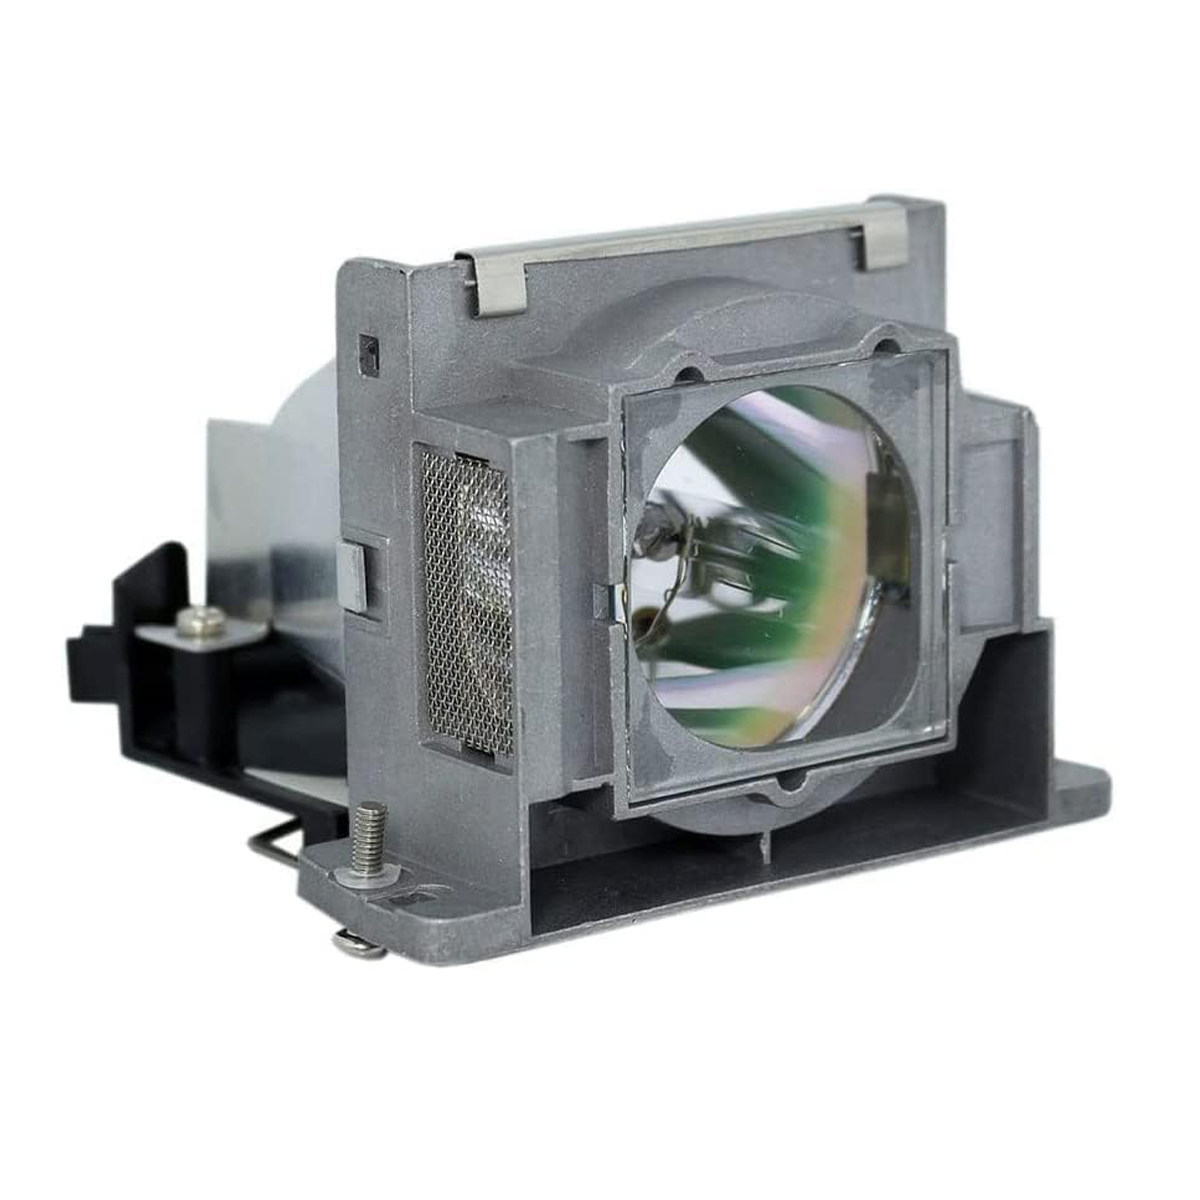 Replacement Projector lamp PJL-725 For YAMAHA DPX 830